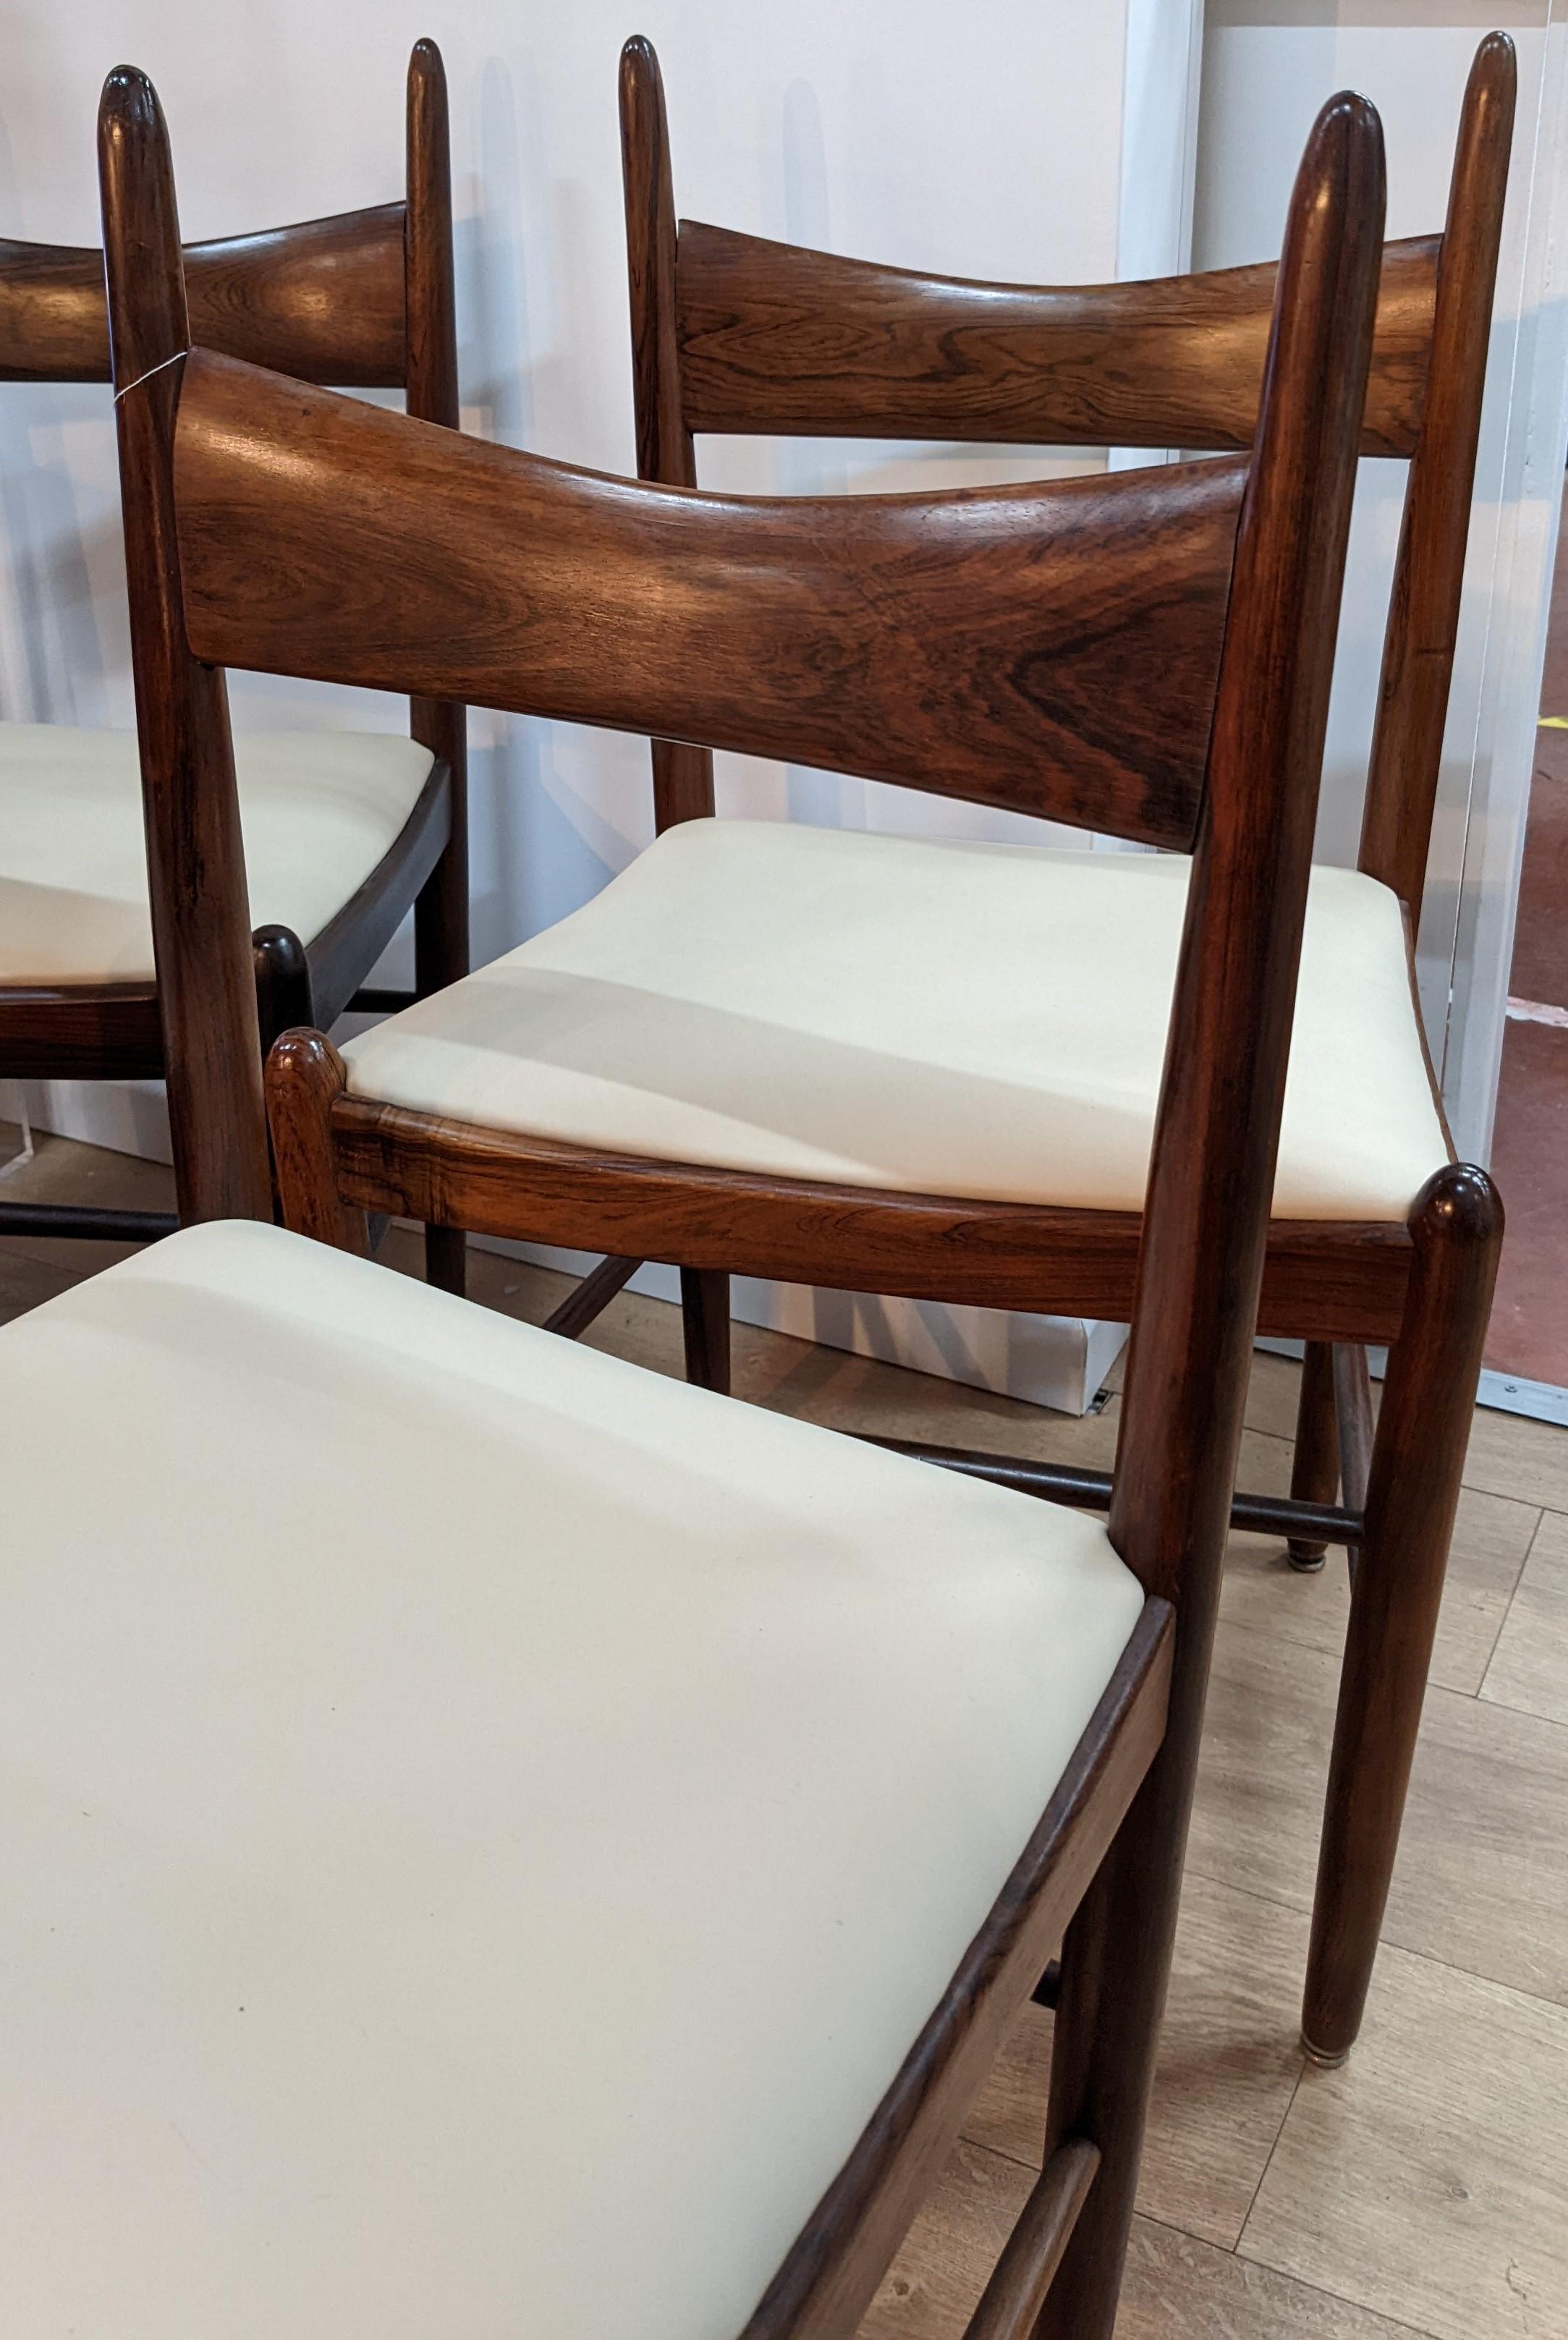 Set of 4 Chairs by Vestervig Eriksen for Tromborg Mobelfabrik, Circa 1960 In Good Condition For Sale In Renens, CH